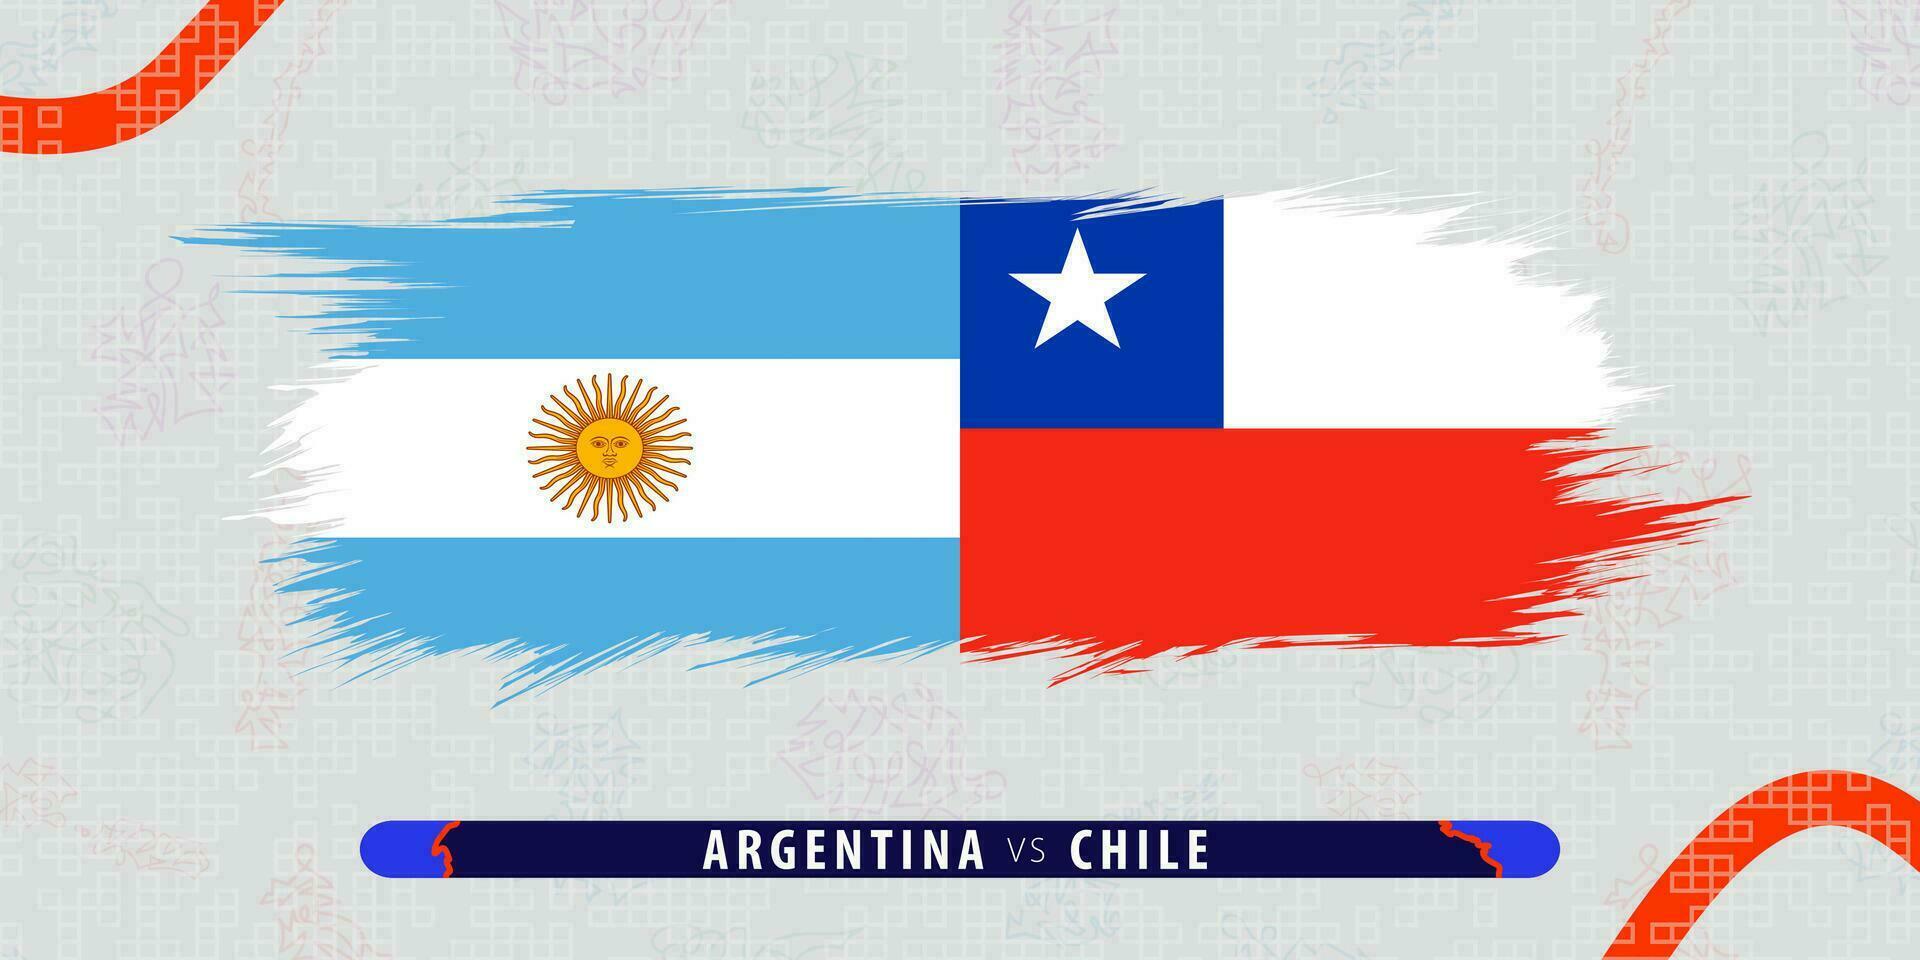 Argentina vs Chile, international rugby match illustration in brushstroke style. Abstract grungy icon for rugby match. vector